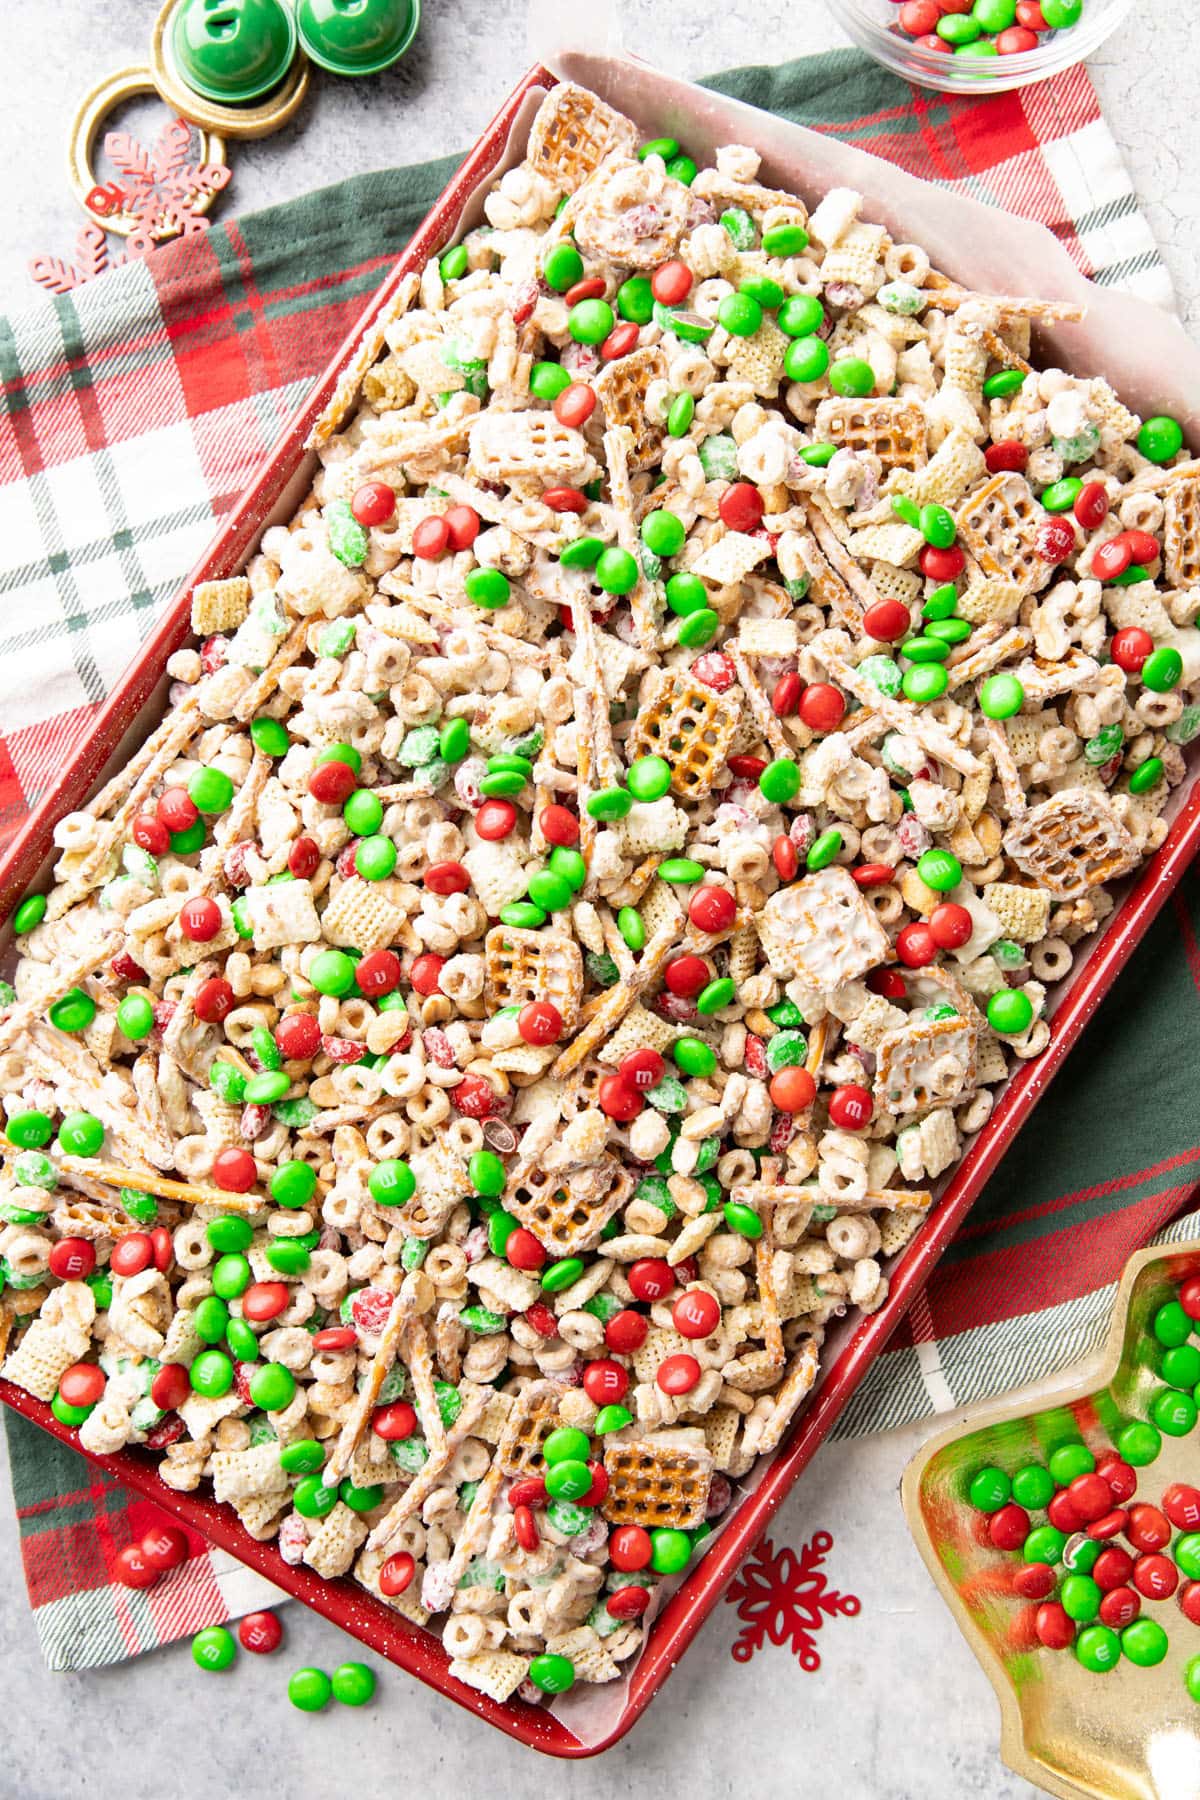 Christmas snack mix complete, with white chocolate coating, chocolate candies, pretzels, cheerios, rice chex, and holiday decorations in gold, green, and red